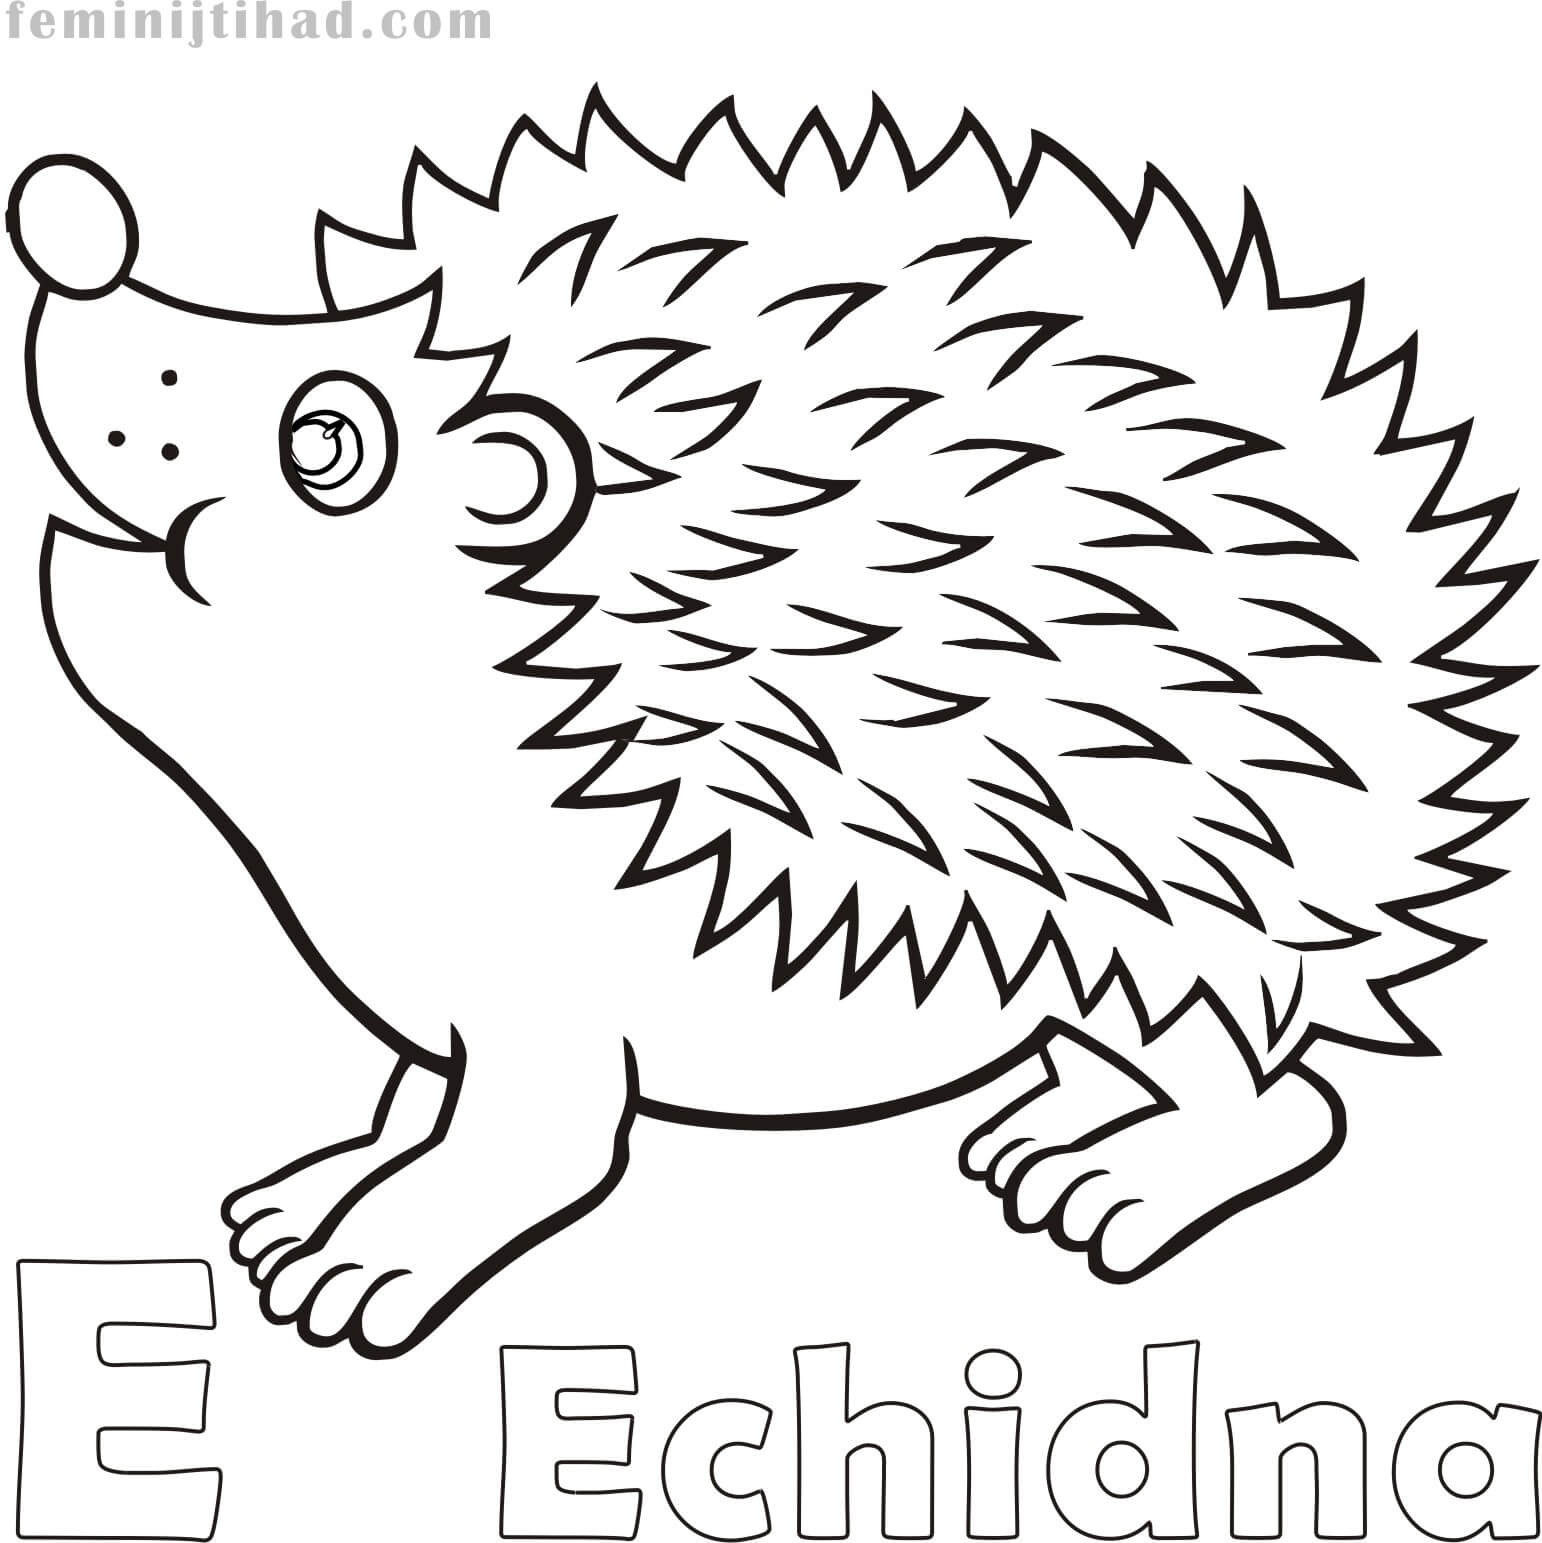 Free Echidna Coloring Page